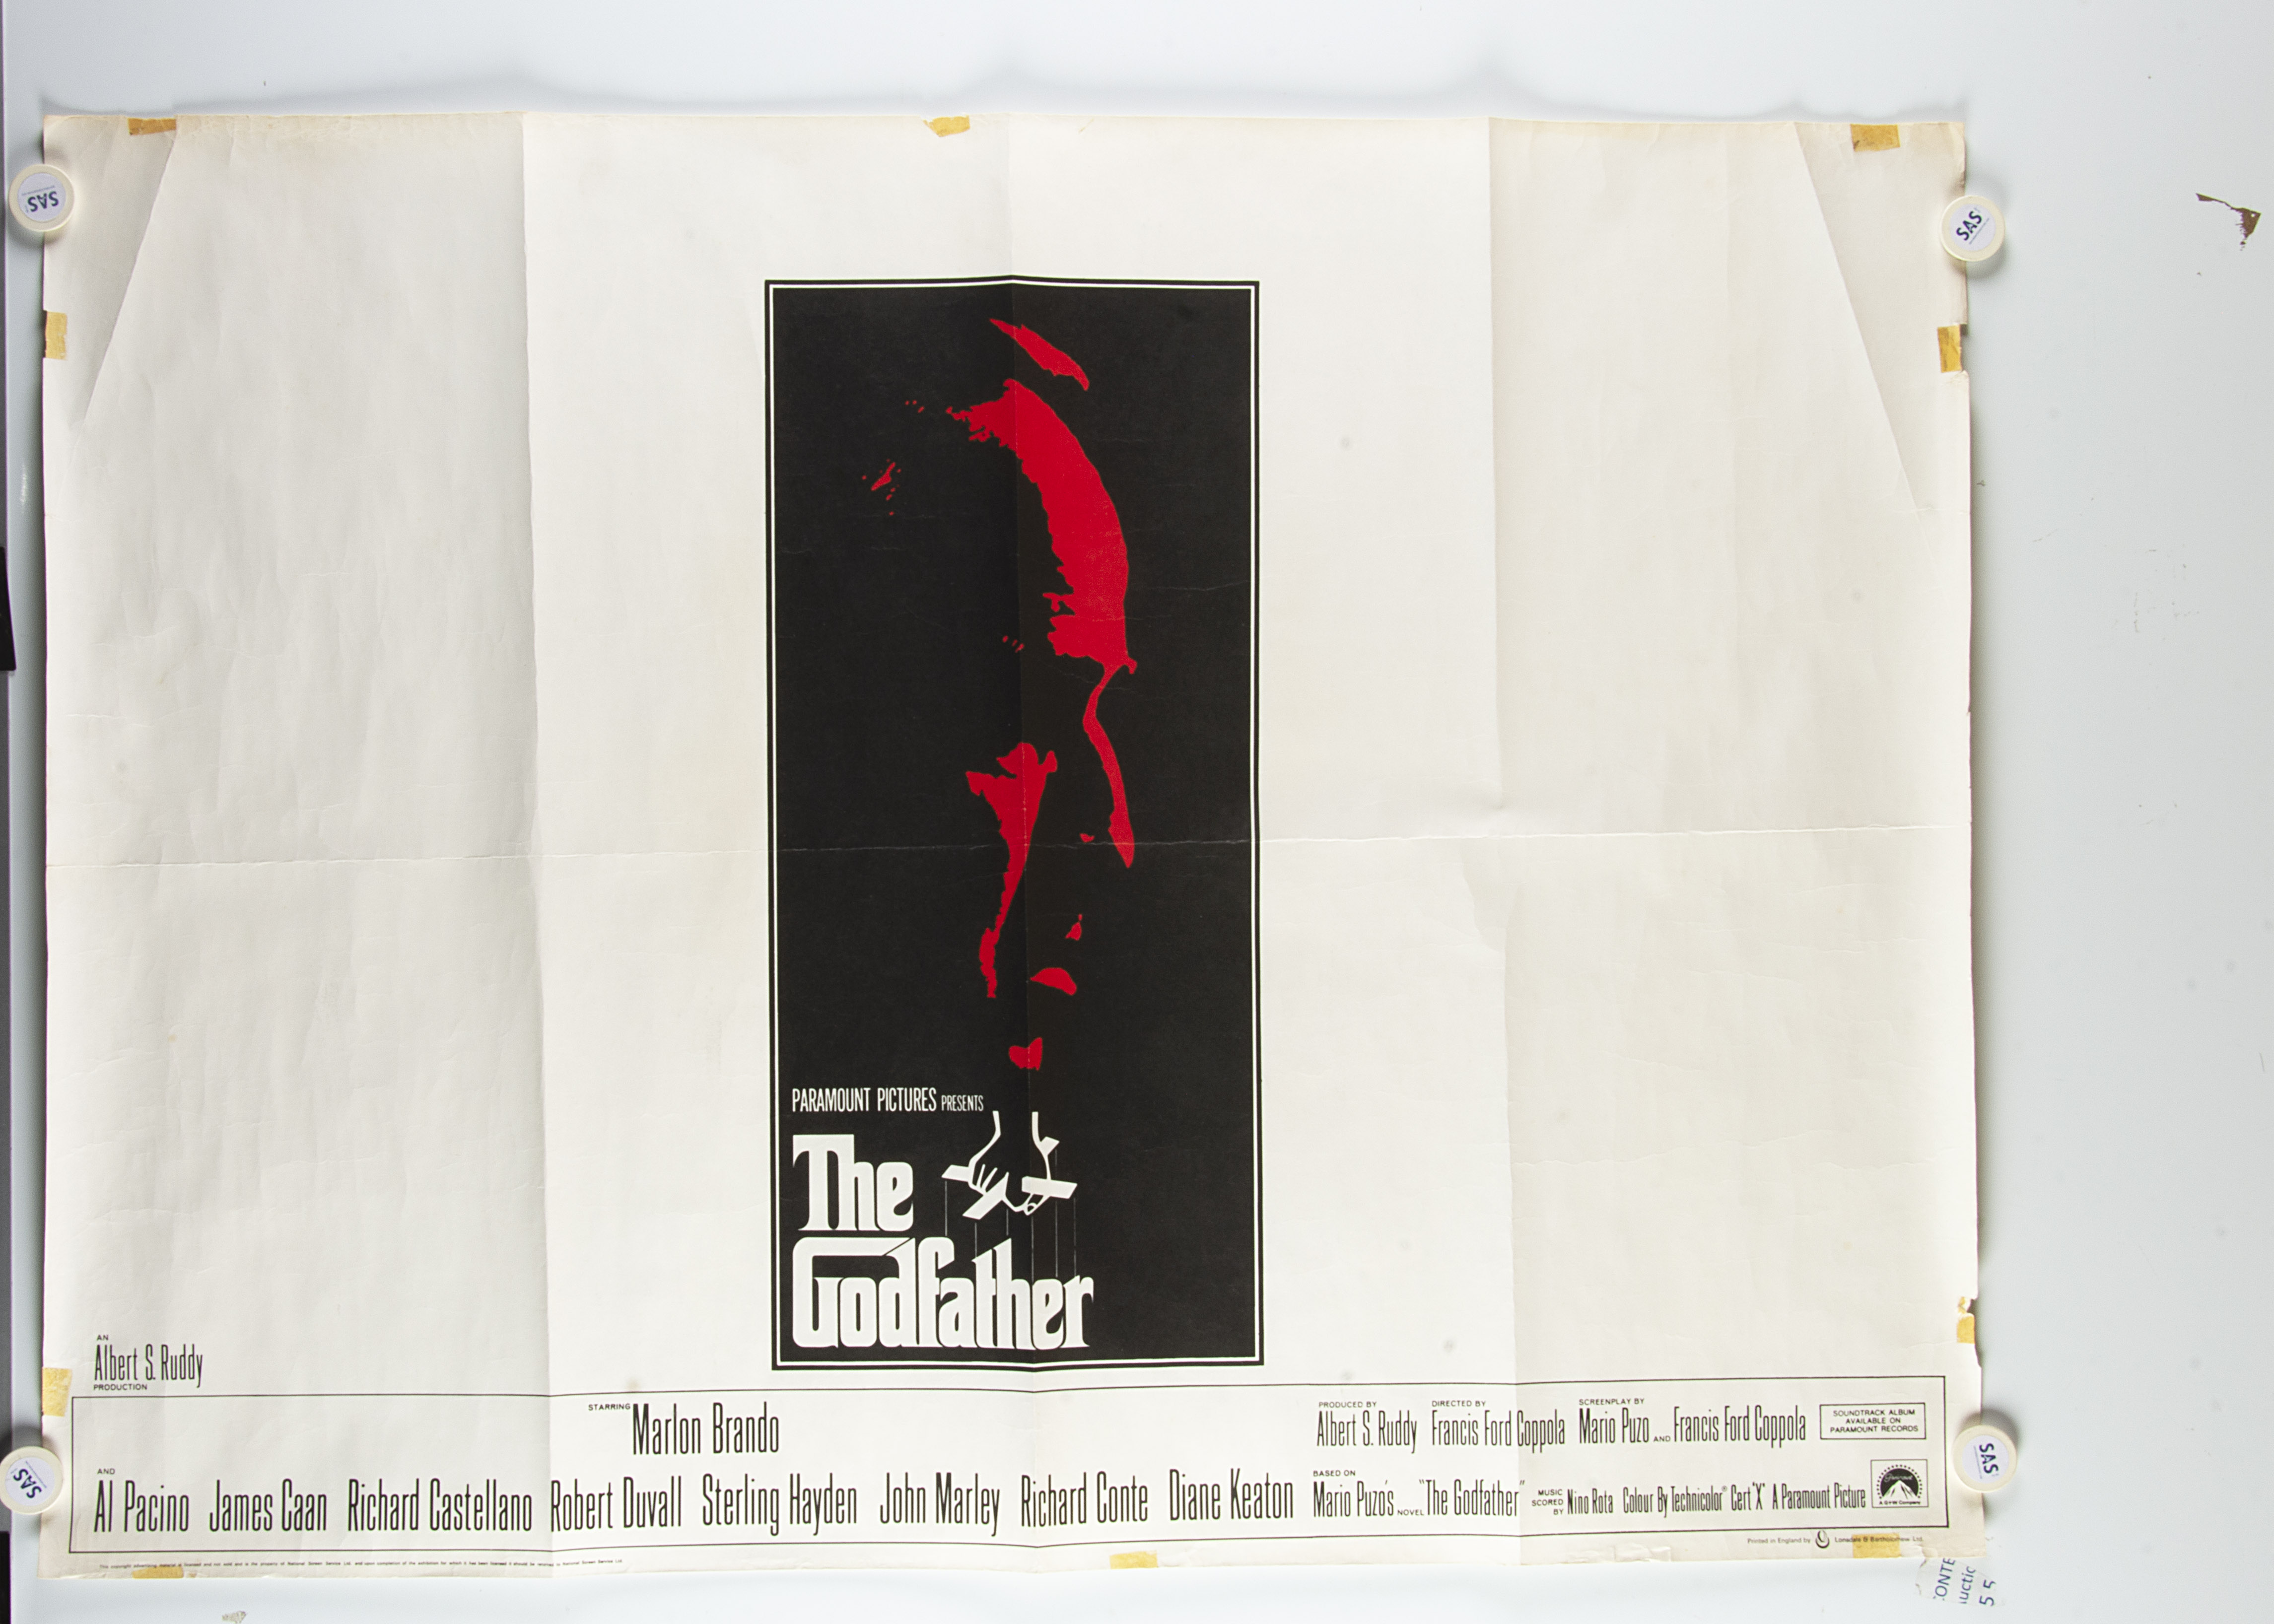 The Godfather UK Quad poster, The Godfather (1972) UK Quad cinema poster, for the iconic Martin